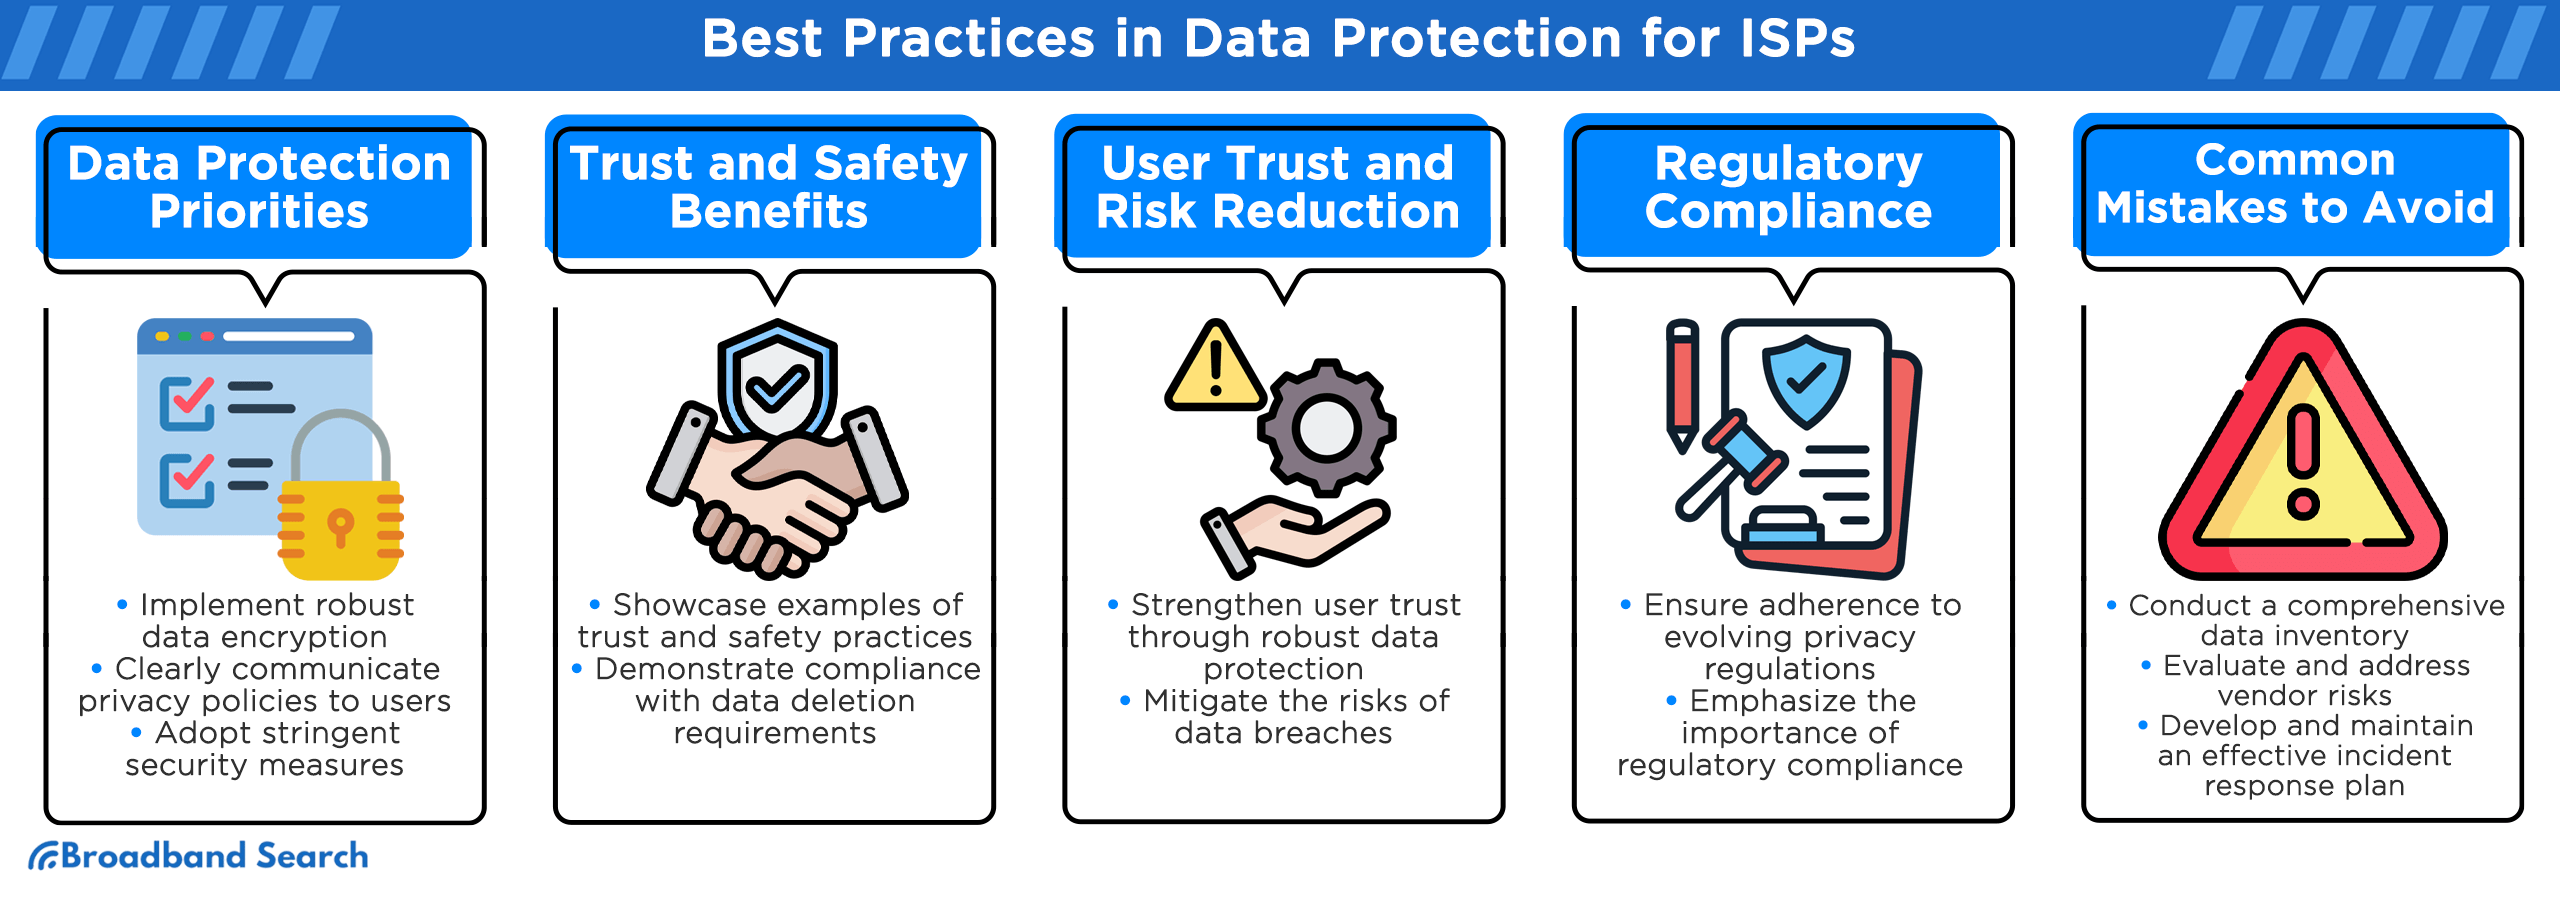 Best practices in data protection for ISPs